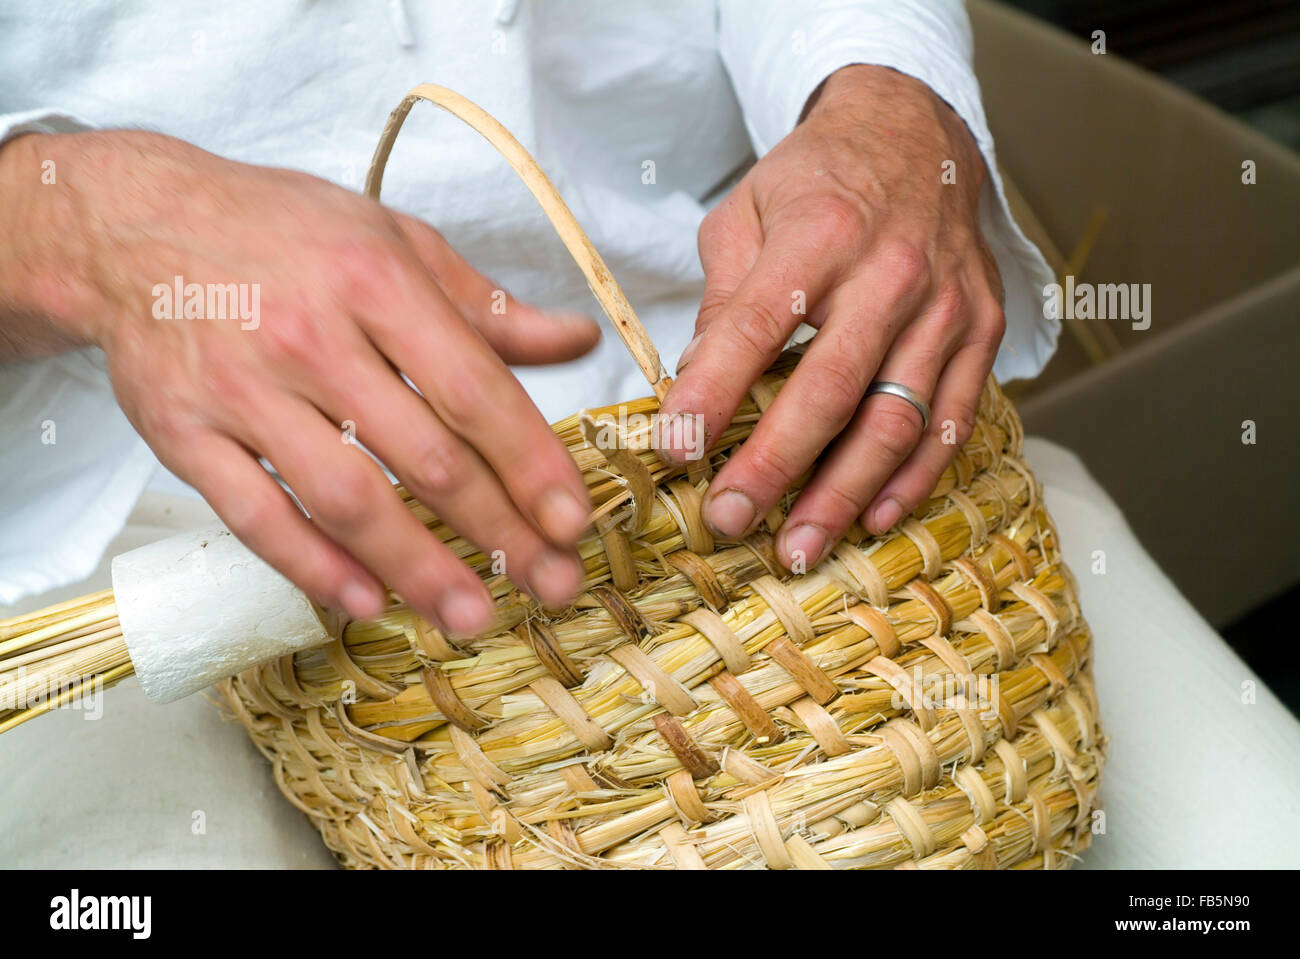 Beekeeper is building a historic beehive Stock Photo